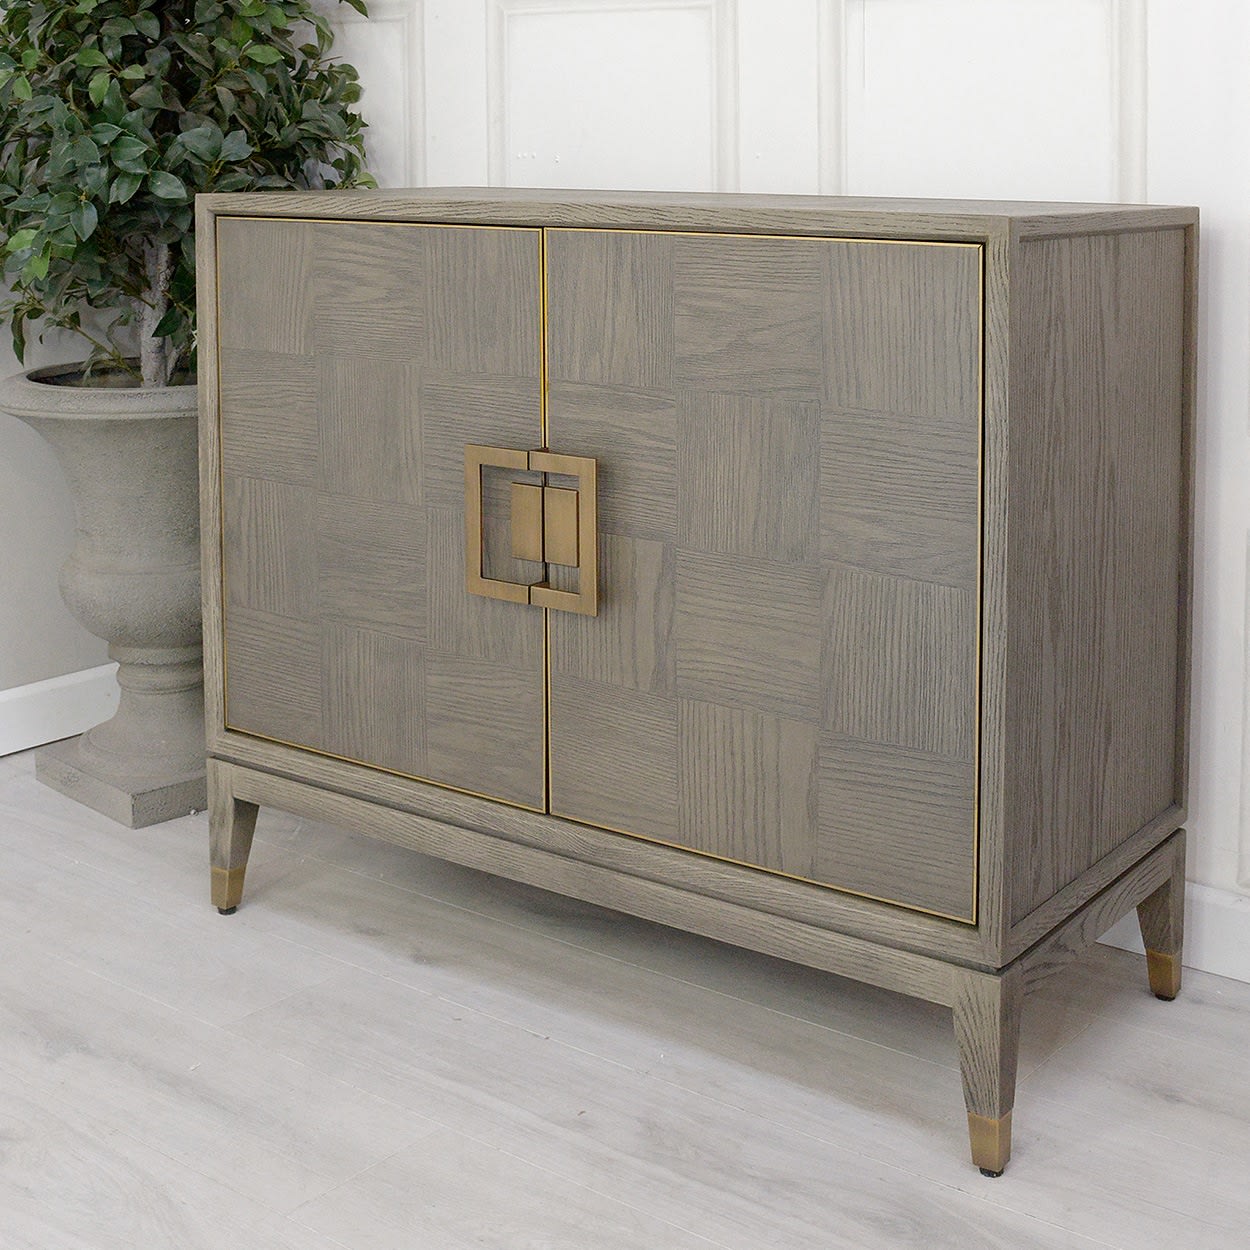 Astor Squares 2 Door Cupboard from the Boho Furniture Collection